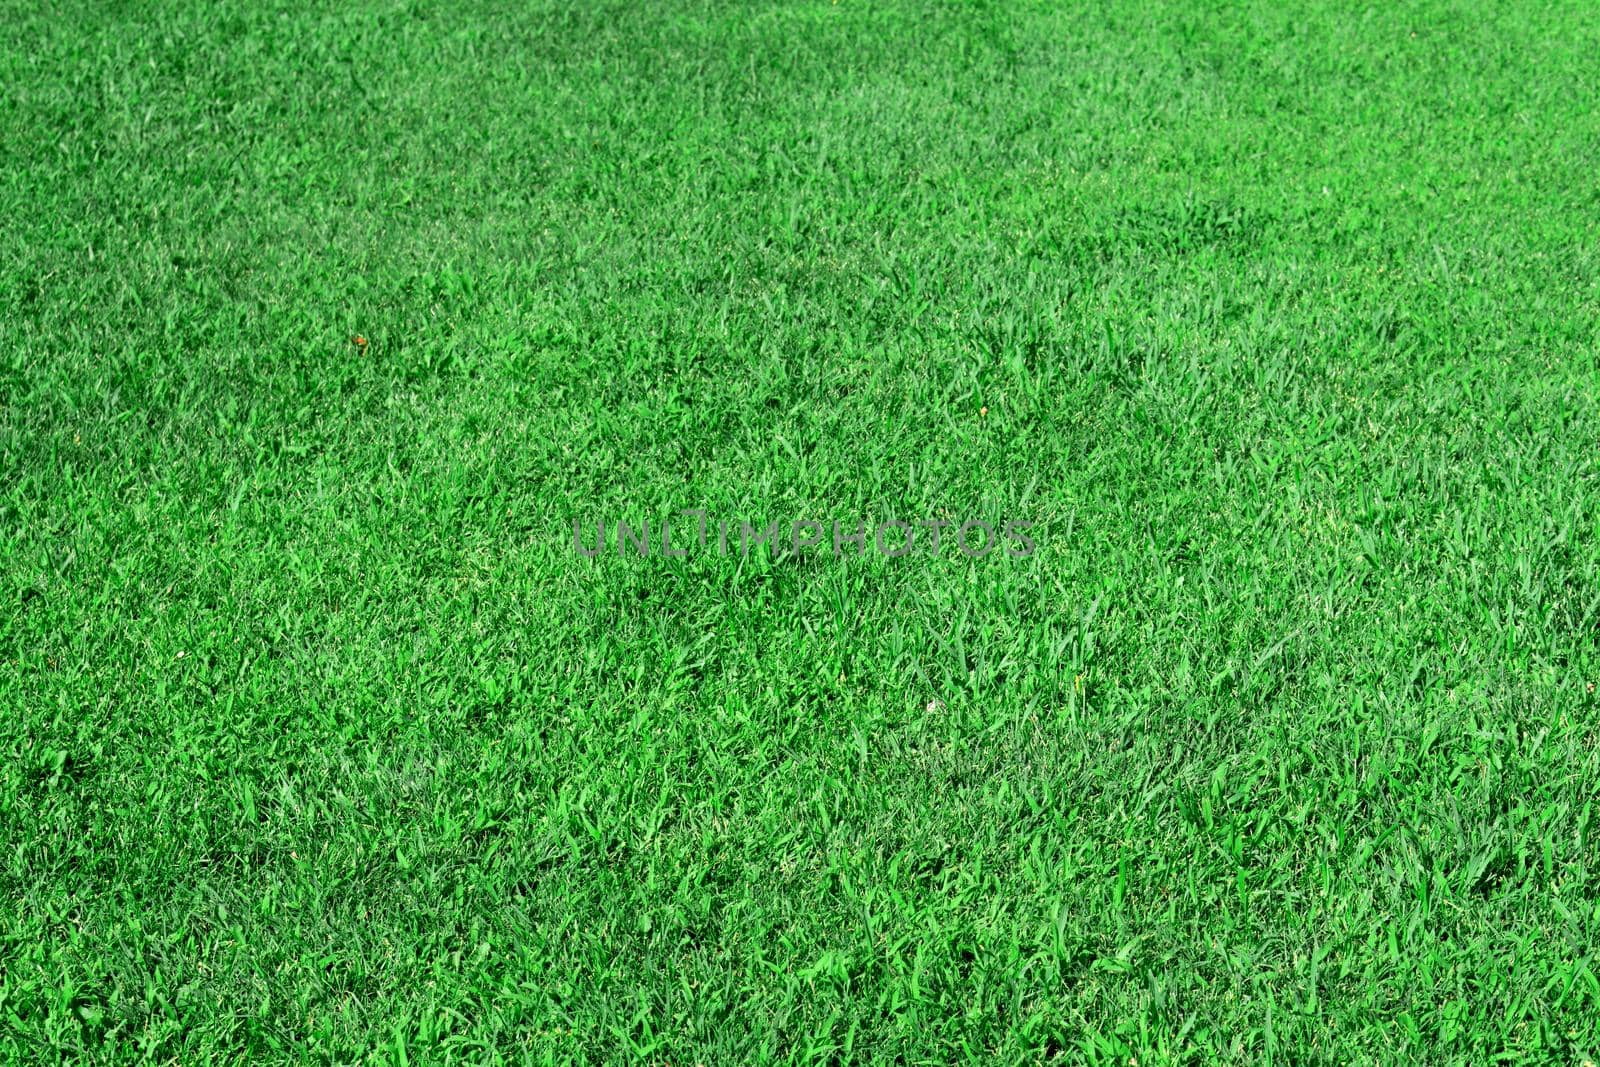 Green lawn grass in the park area, texture, background